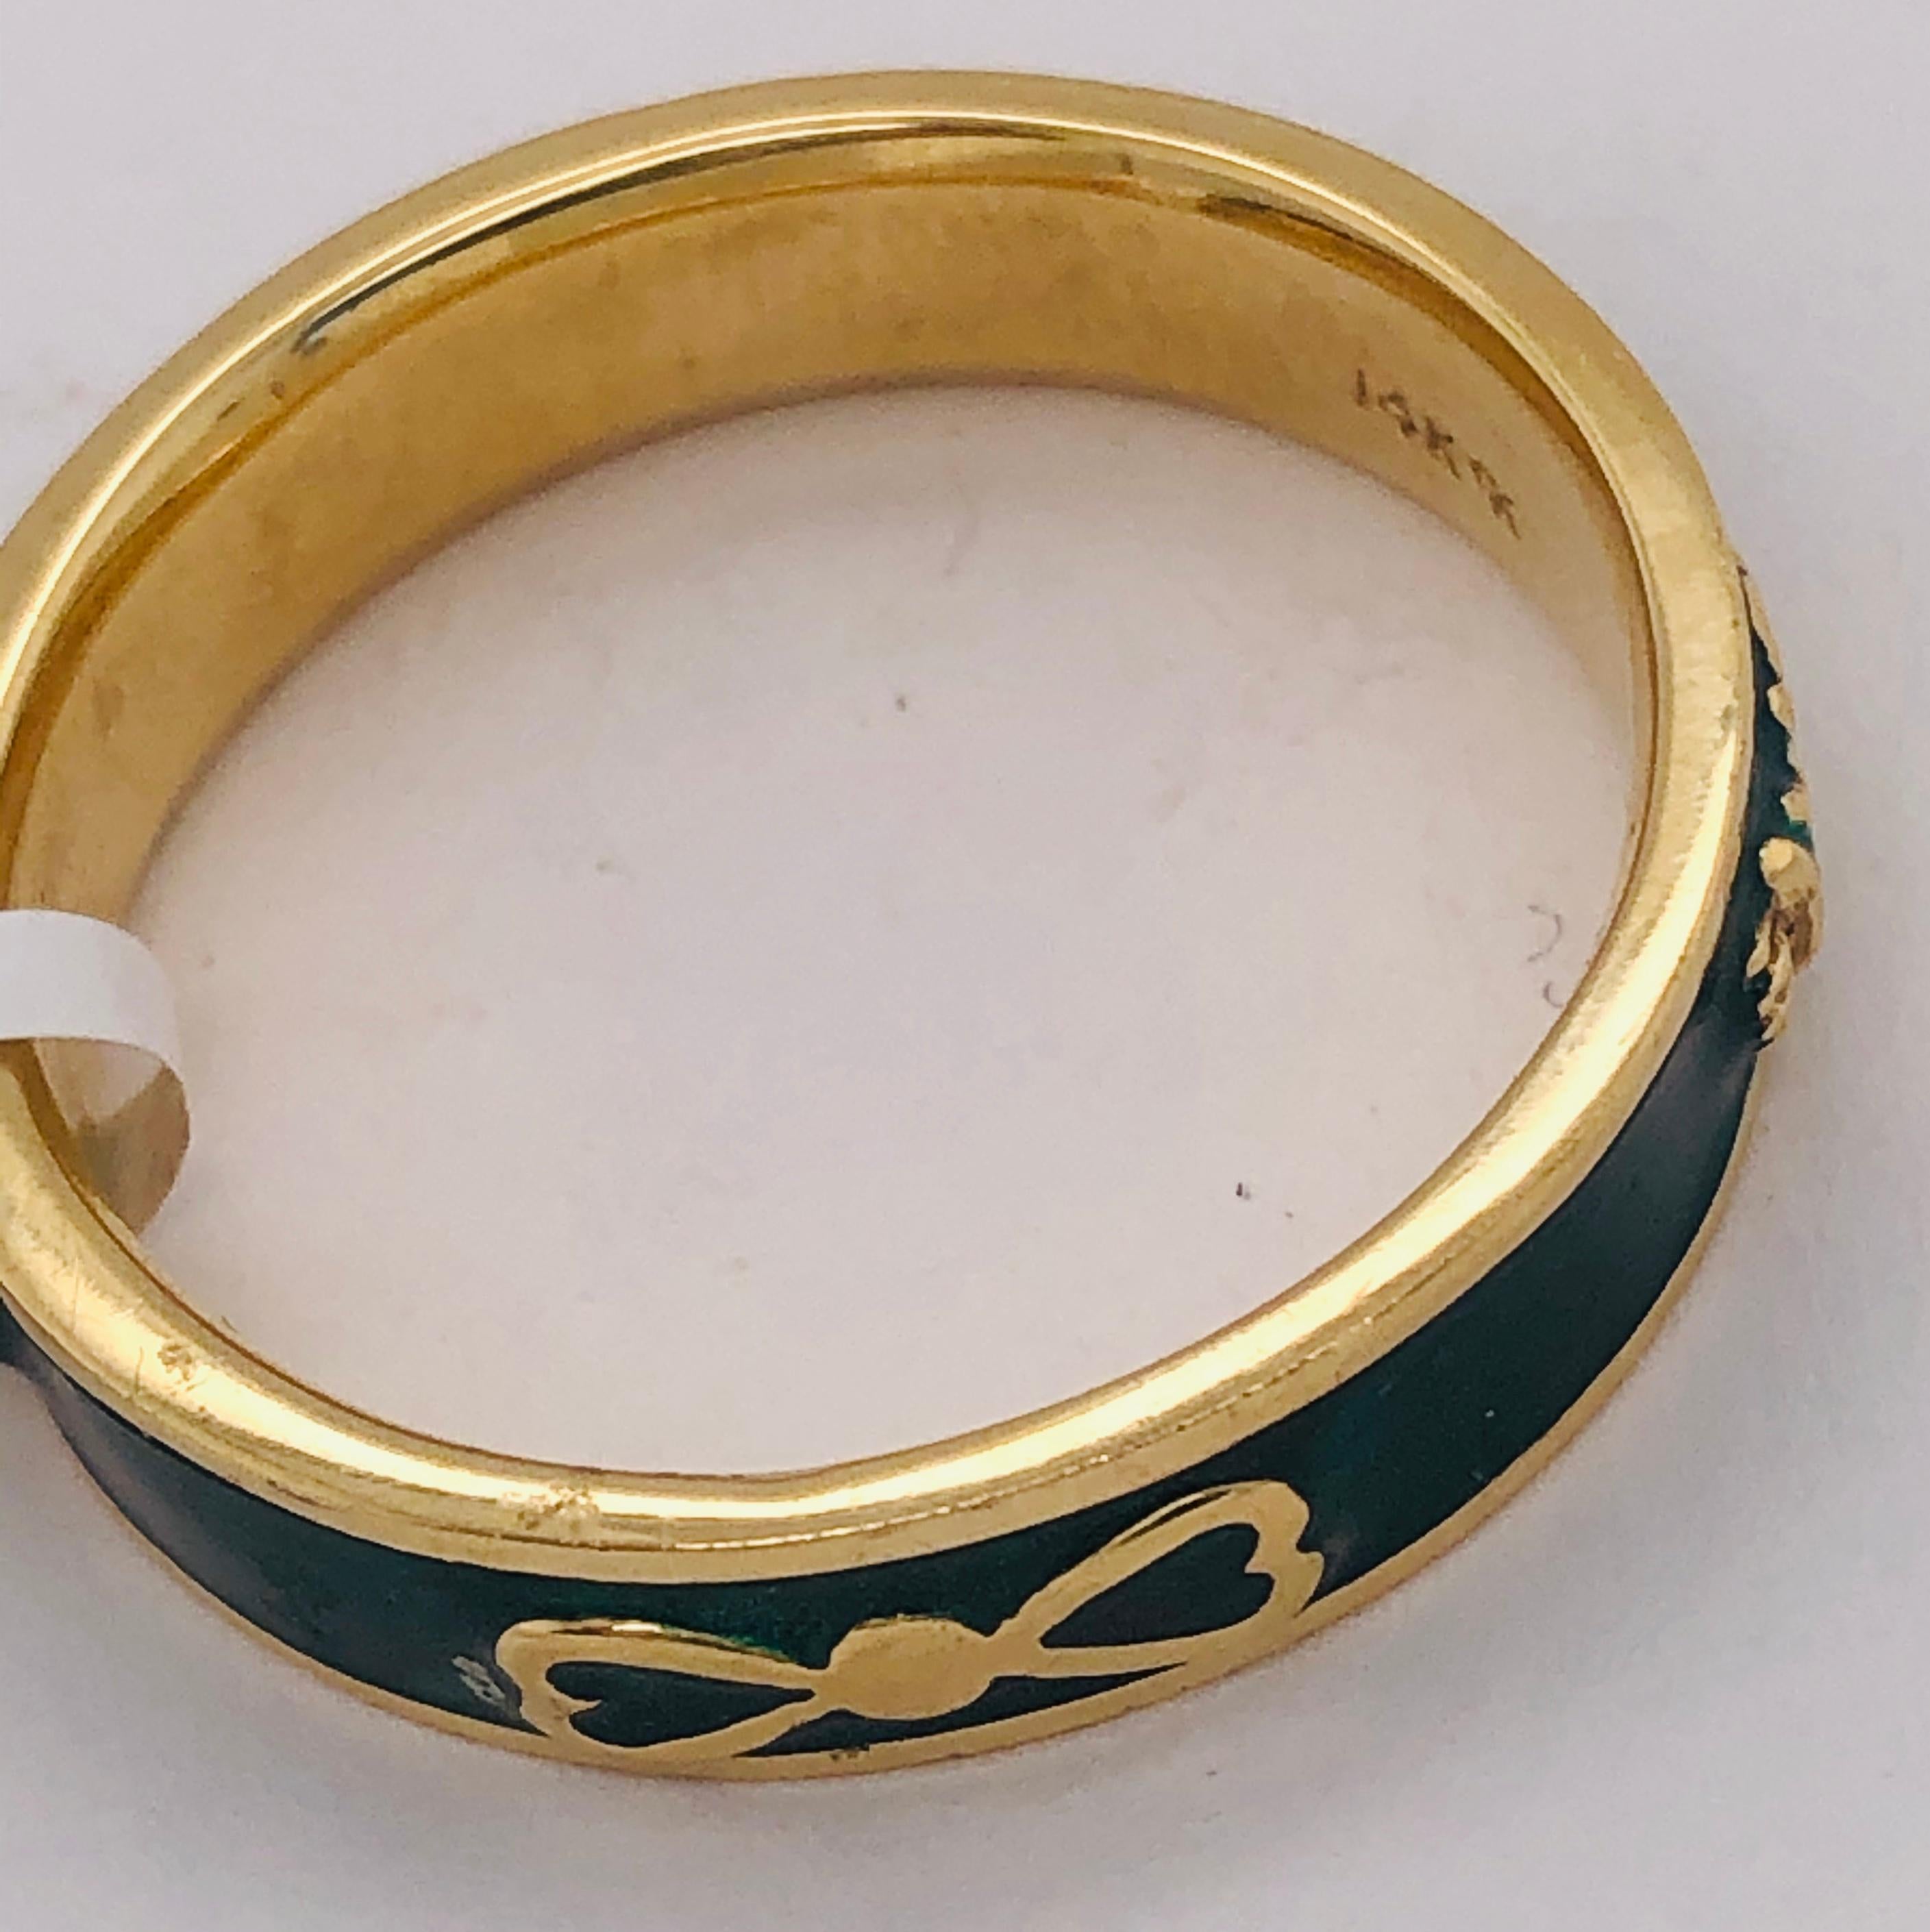 14 Karat Yellow Gold Fashion Ring In Good Condition For Sale In Stamford, CT